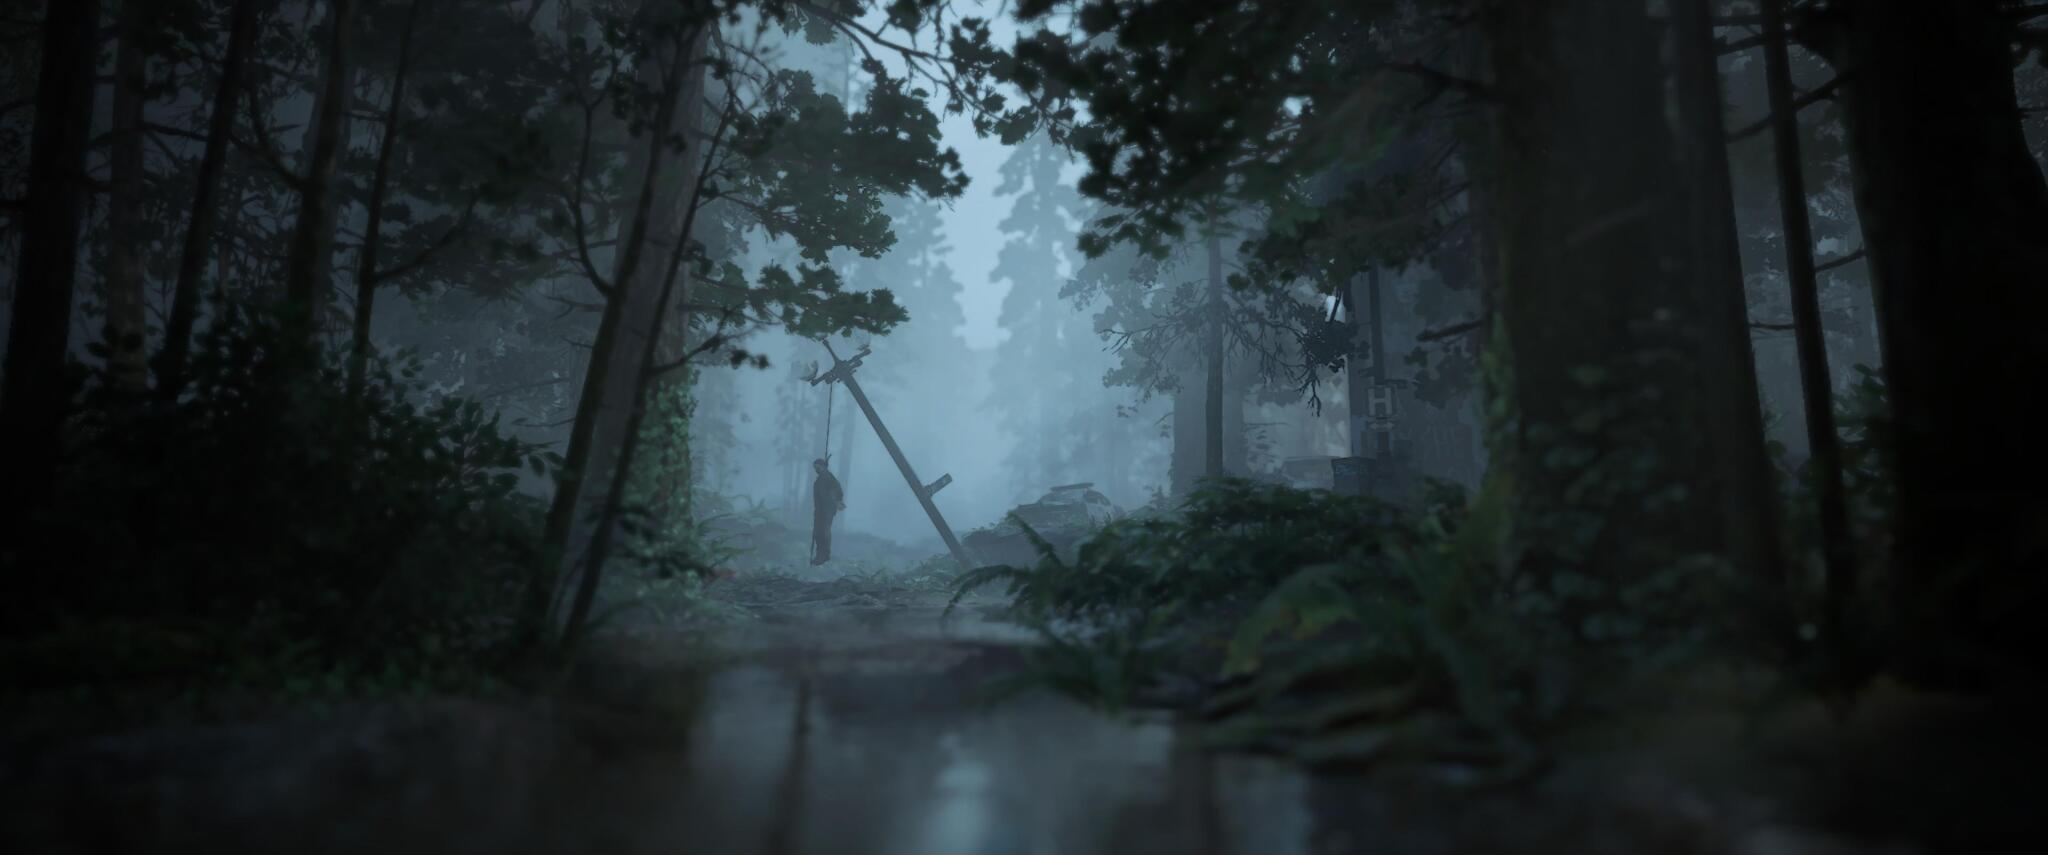 The Forest, in "The Last of Us: Part II", captured by Marty Friedel